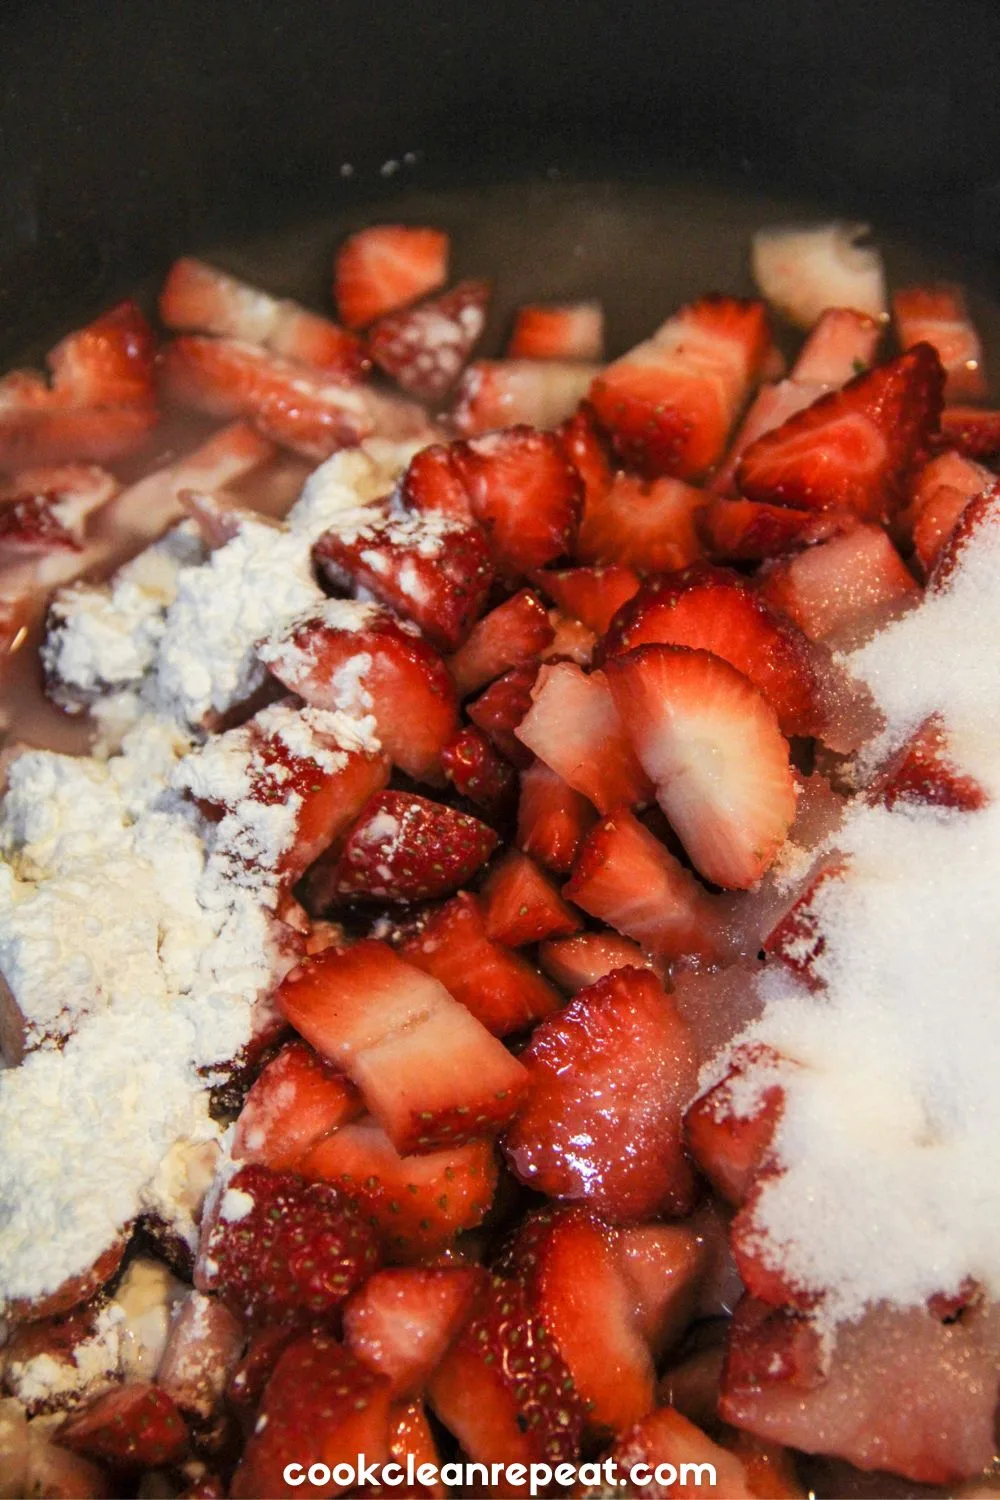 strawberries being cooked